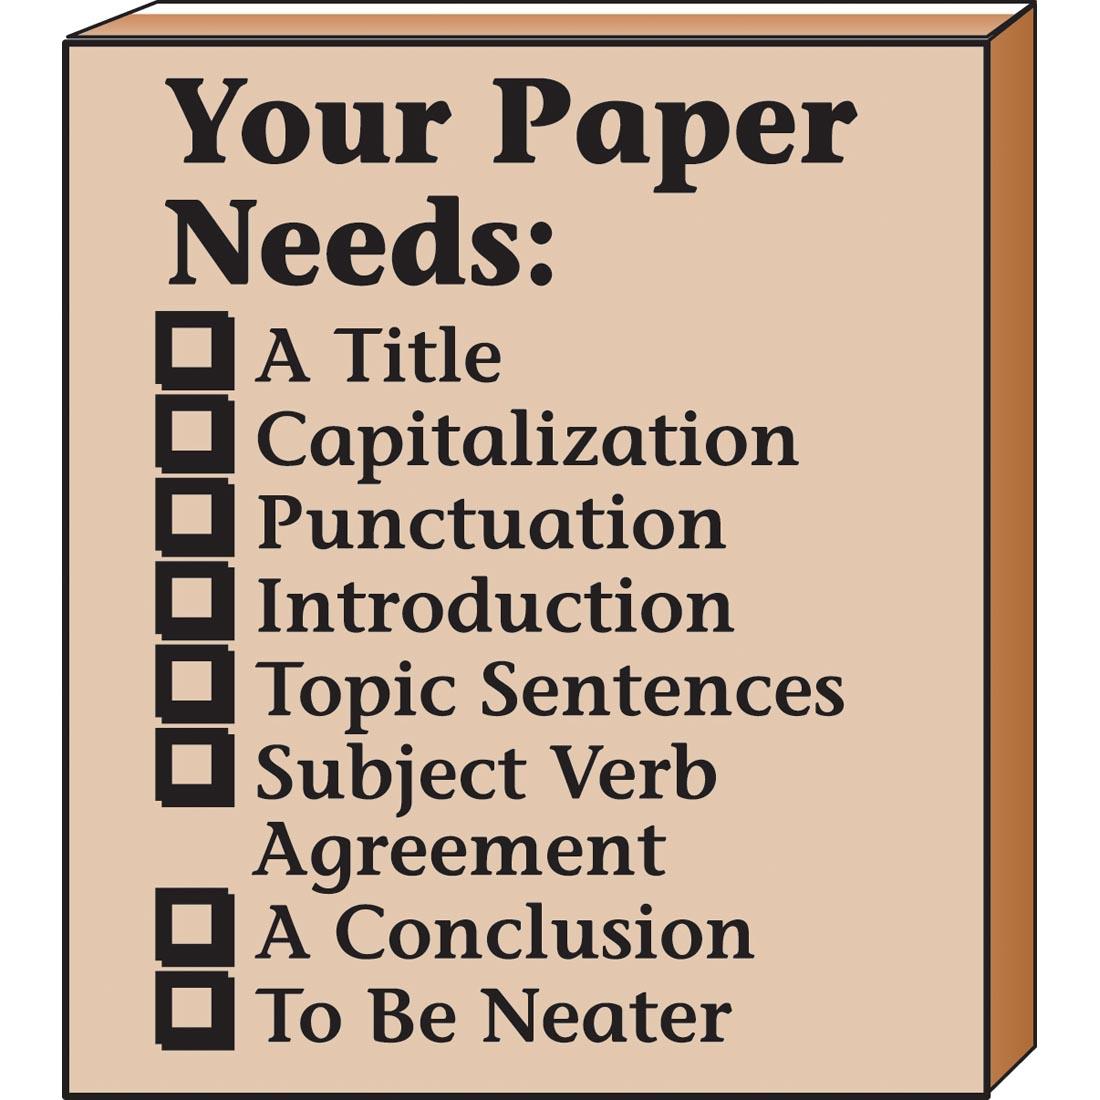 Stamp says Your Paper Needs A Title; Capitalization; Punctiation, Introduction, Topic Sentences; Subject Verb Agreement; A Conclusion; To Be Neater